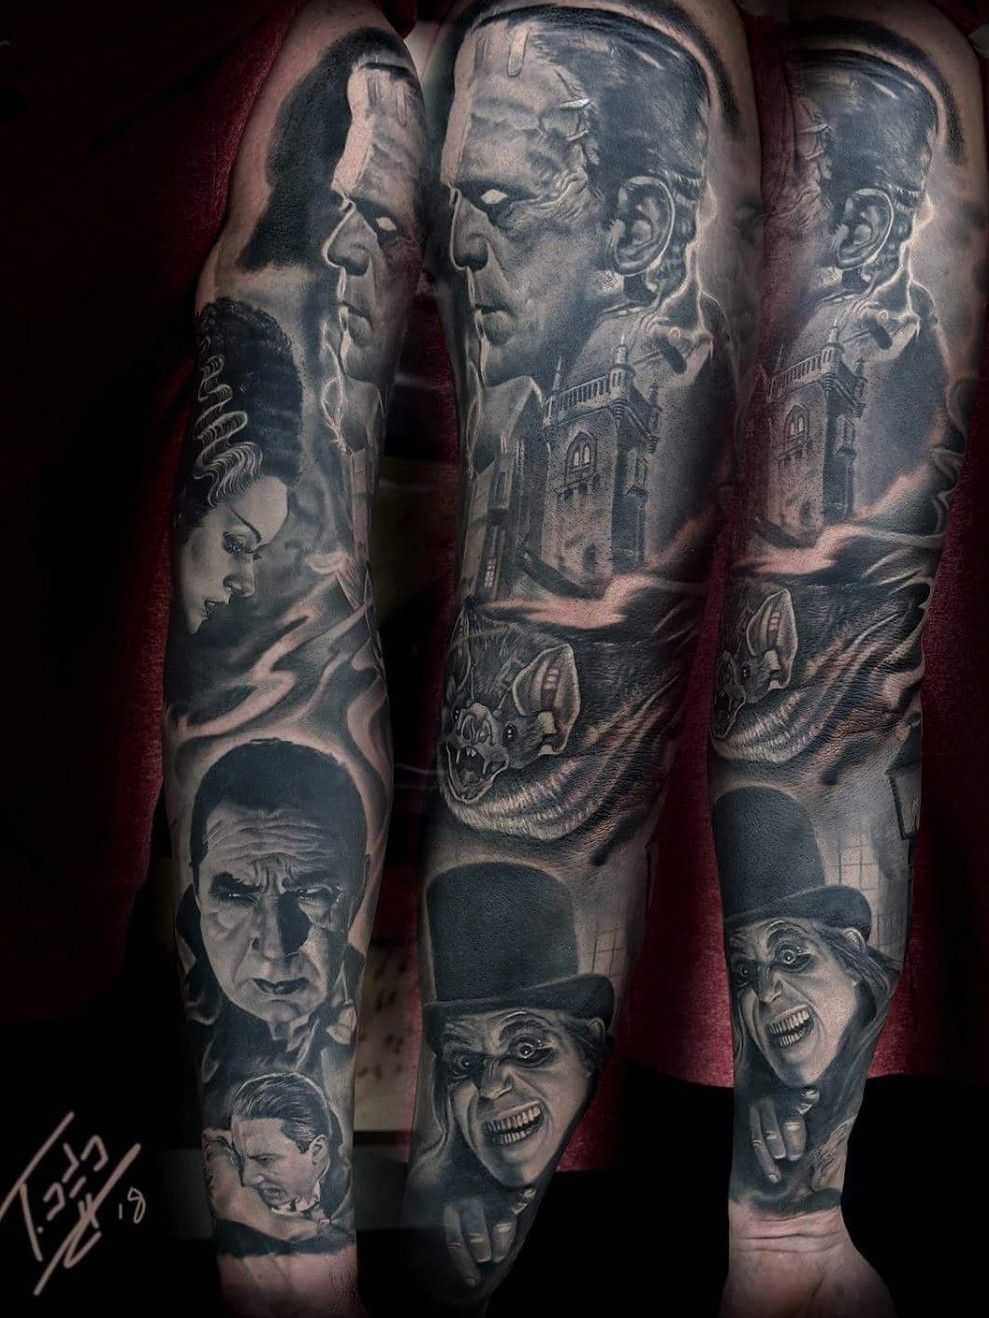 universal monsters tattoo  Explore 201 42908  April A Taylor  Flickr